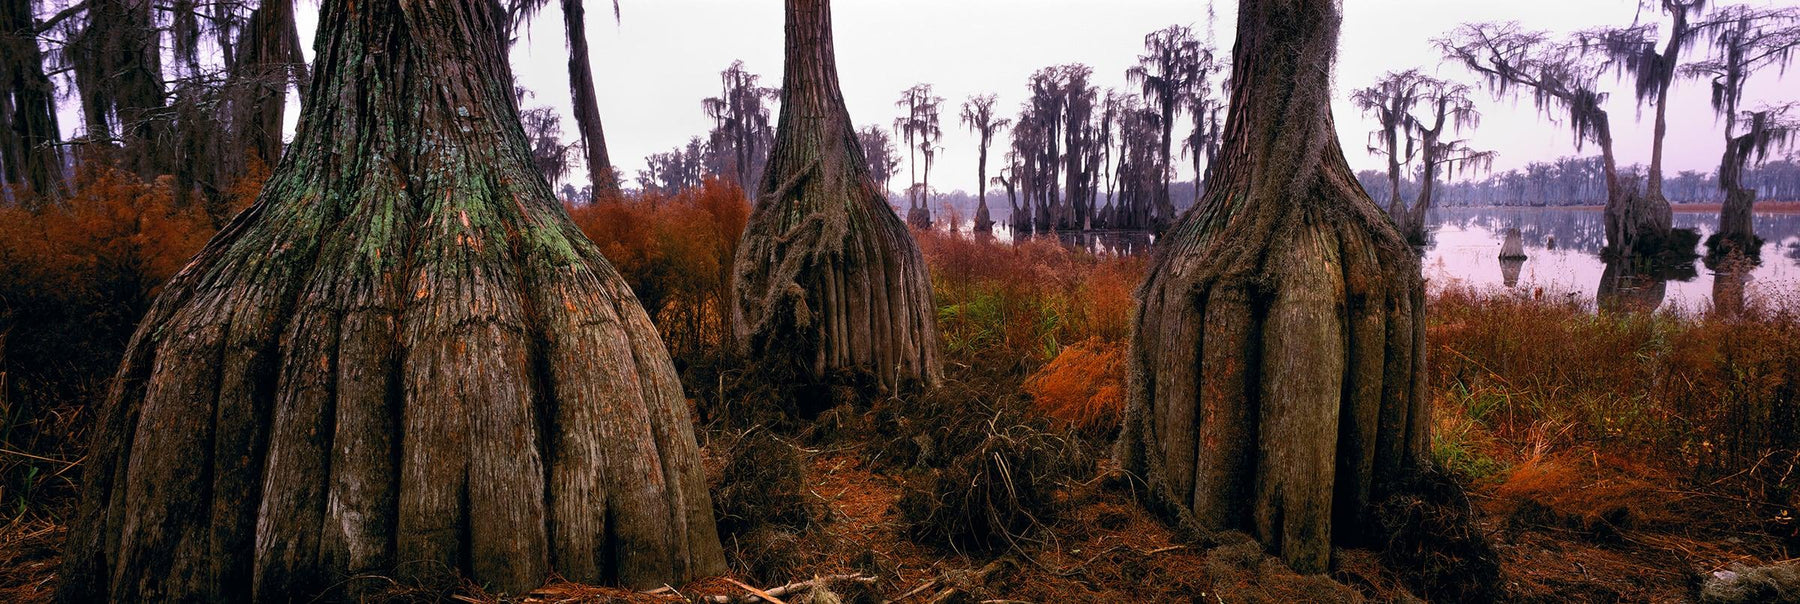 Root bases of giant cypress trees in the swamps of Okefenokee National Wildlife Refuge Georgia